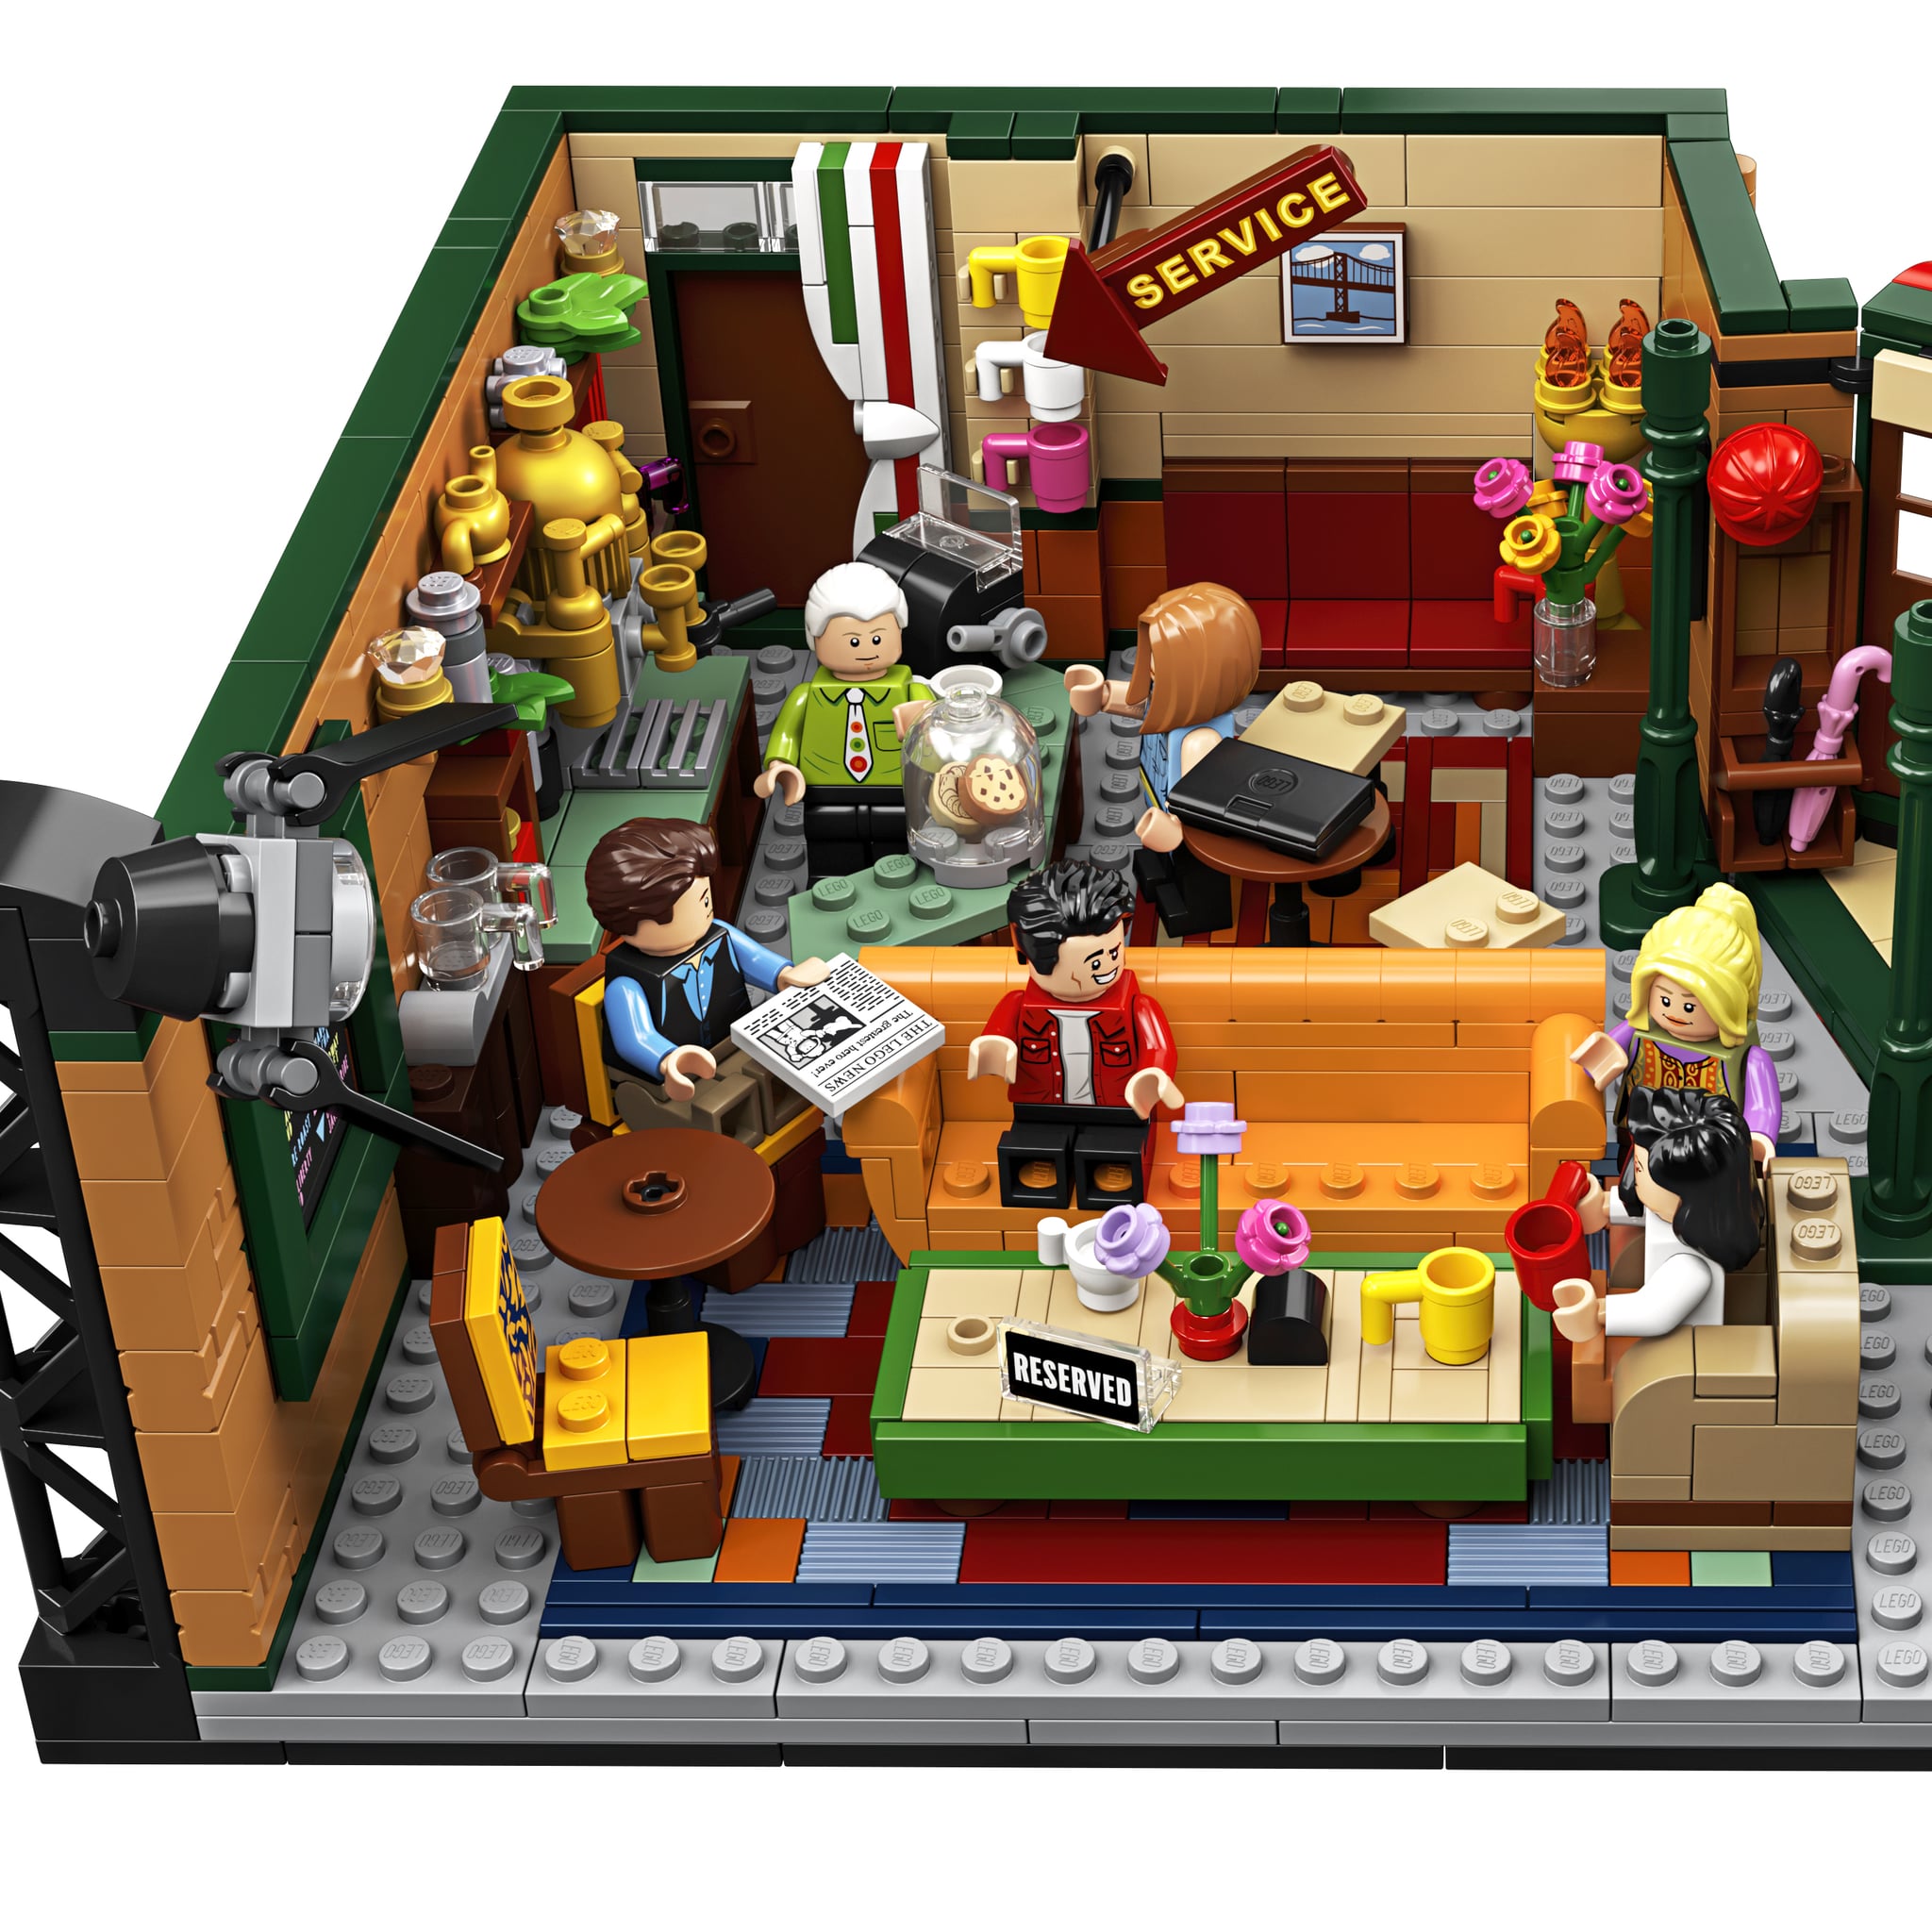 friends lego set where to buy